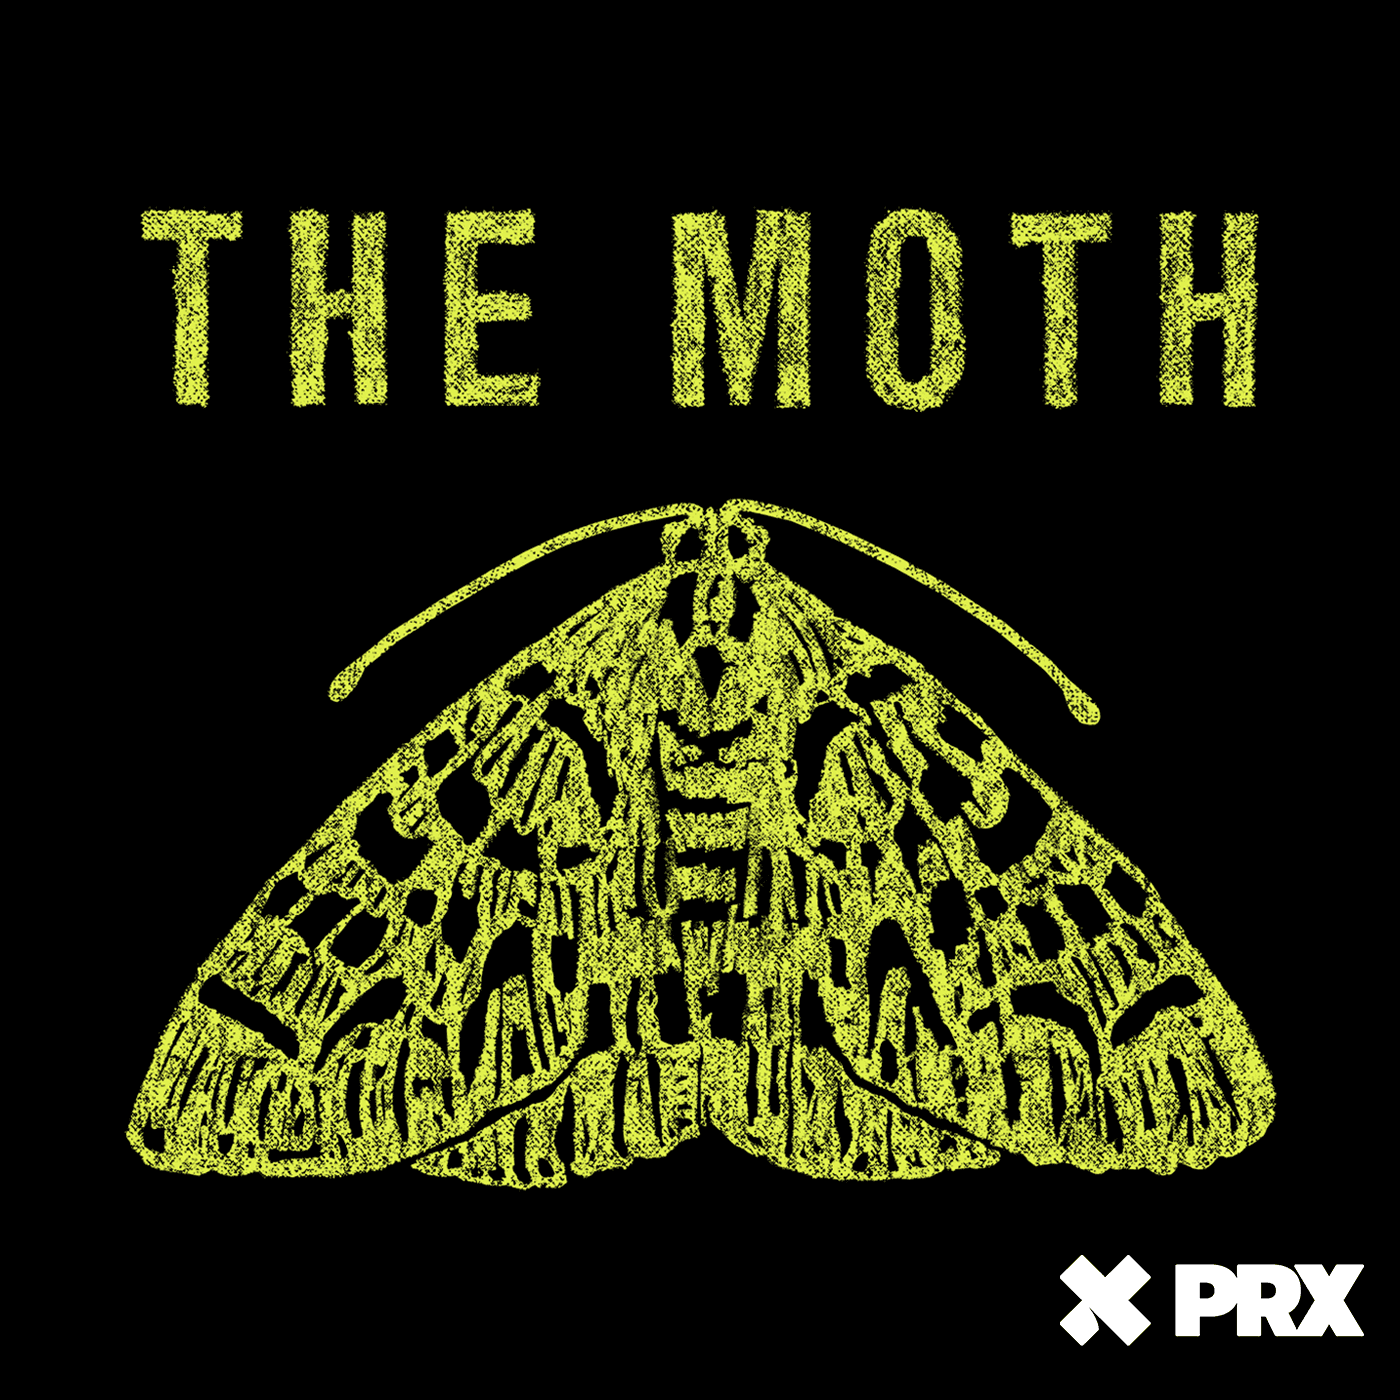 Thumbnail for "The Moth Radio Hour: The Moth StorySLAM".